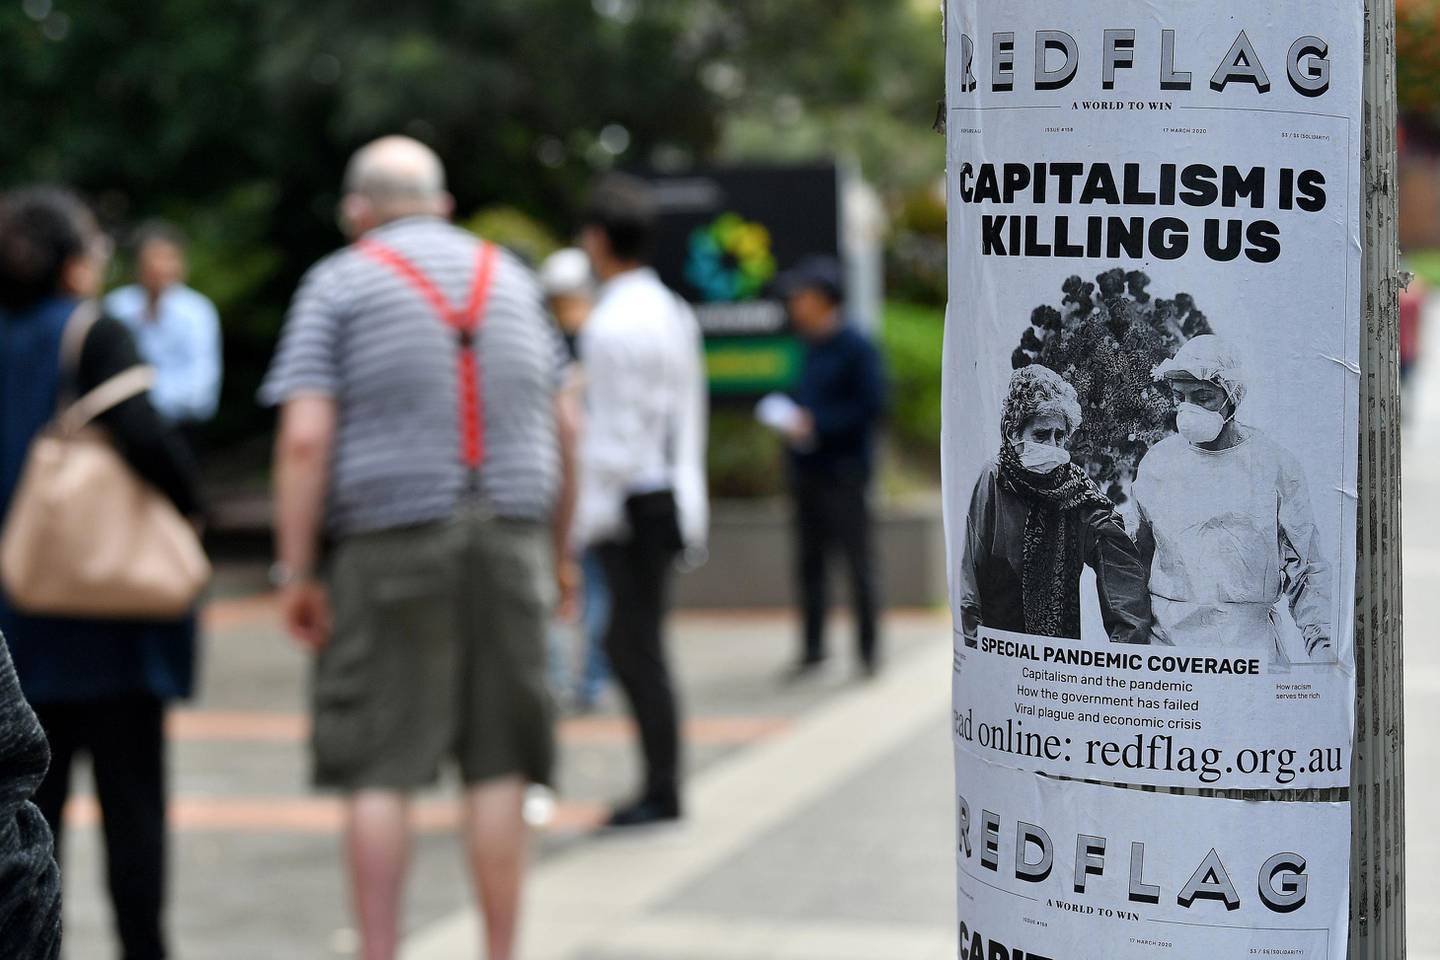 An anti-capitalist flyer is seen on a pole as people wait in a queue to receive benefit payouts, including unemployment and small business support as the novel coronavirus inflicts a toll on the economy, at a Centerlink payment centre in downtown Sydney on March 27, 2020. - The number of confirmed covid-19 cases in Australia passed the 3,000 mark on March 27, with the vast majority of infections in major east coast cities like Sydney, Brisbane and Melbourne. (Photo by Saeed KHAN / AFP)